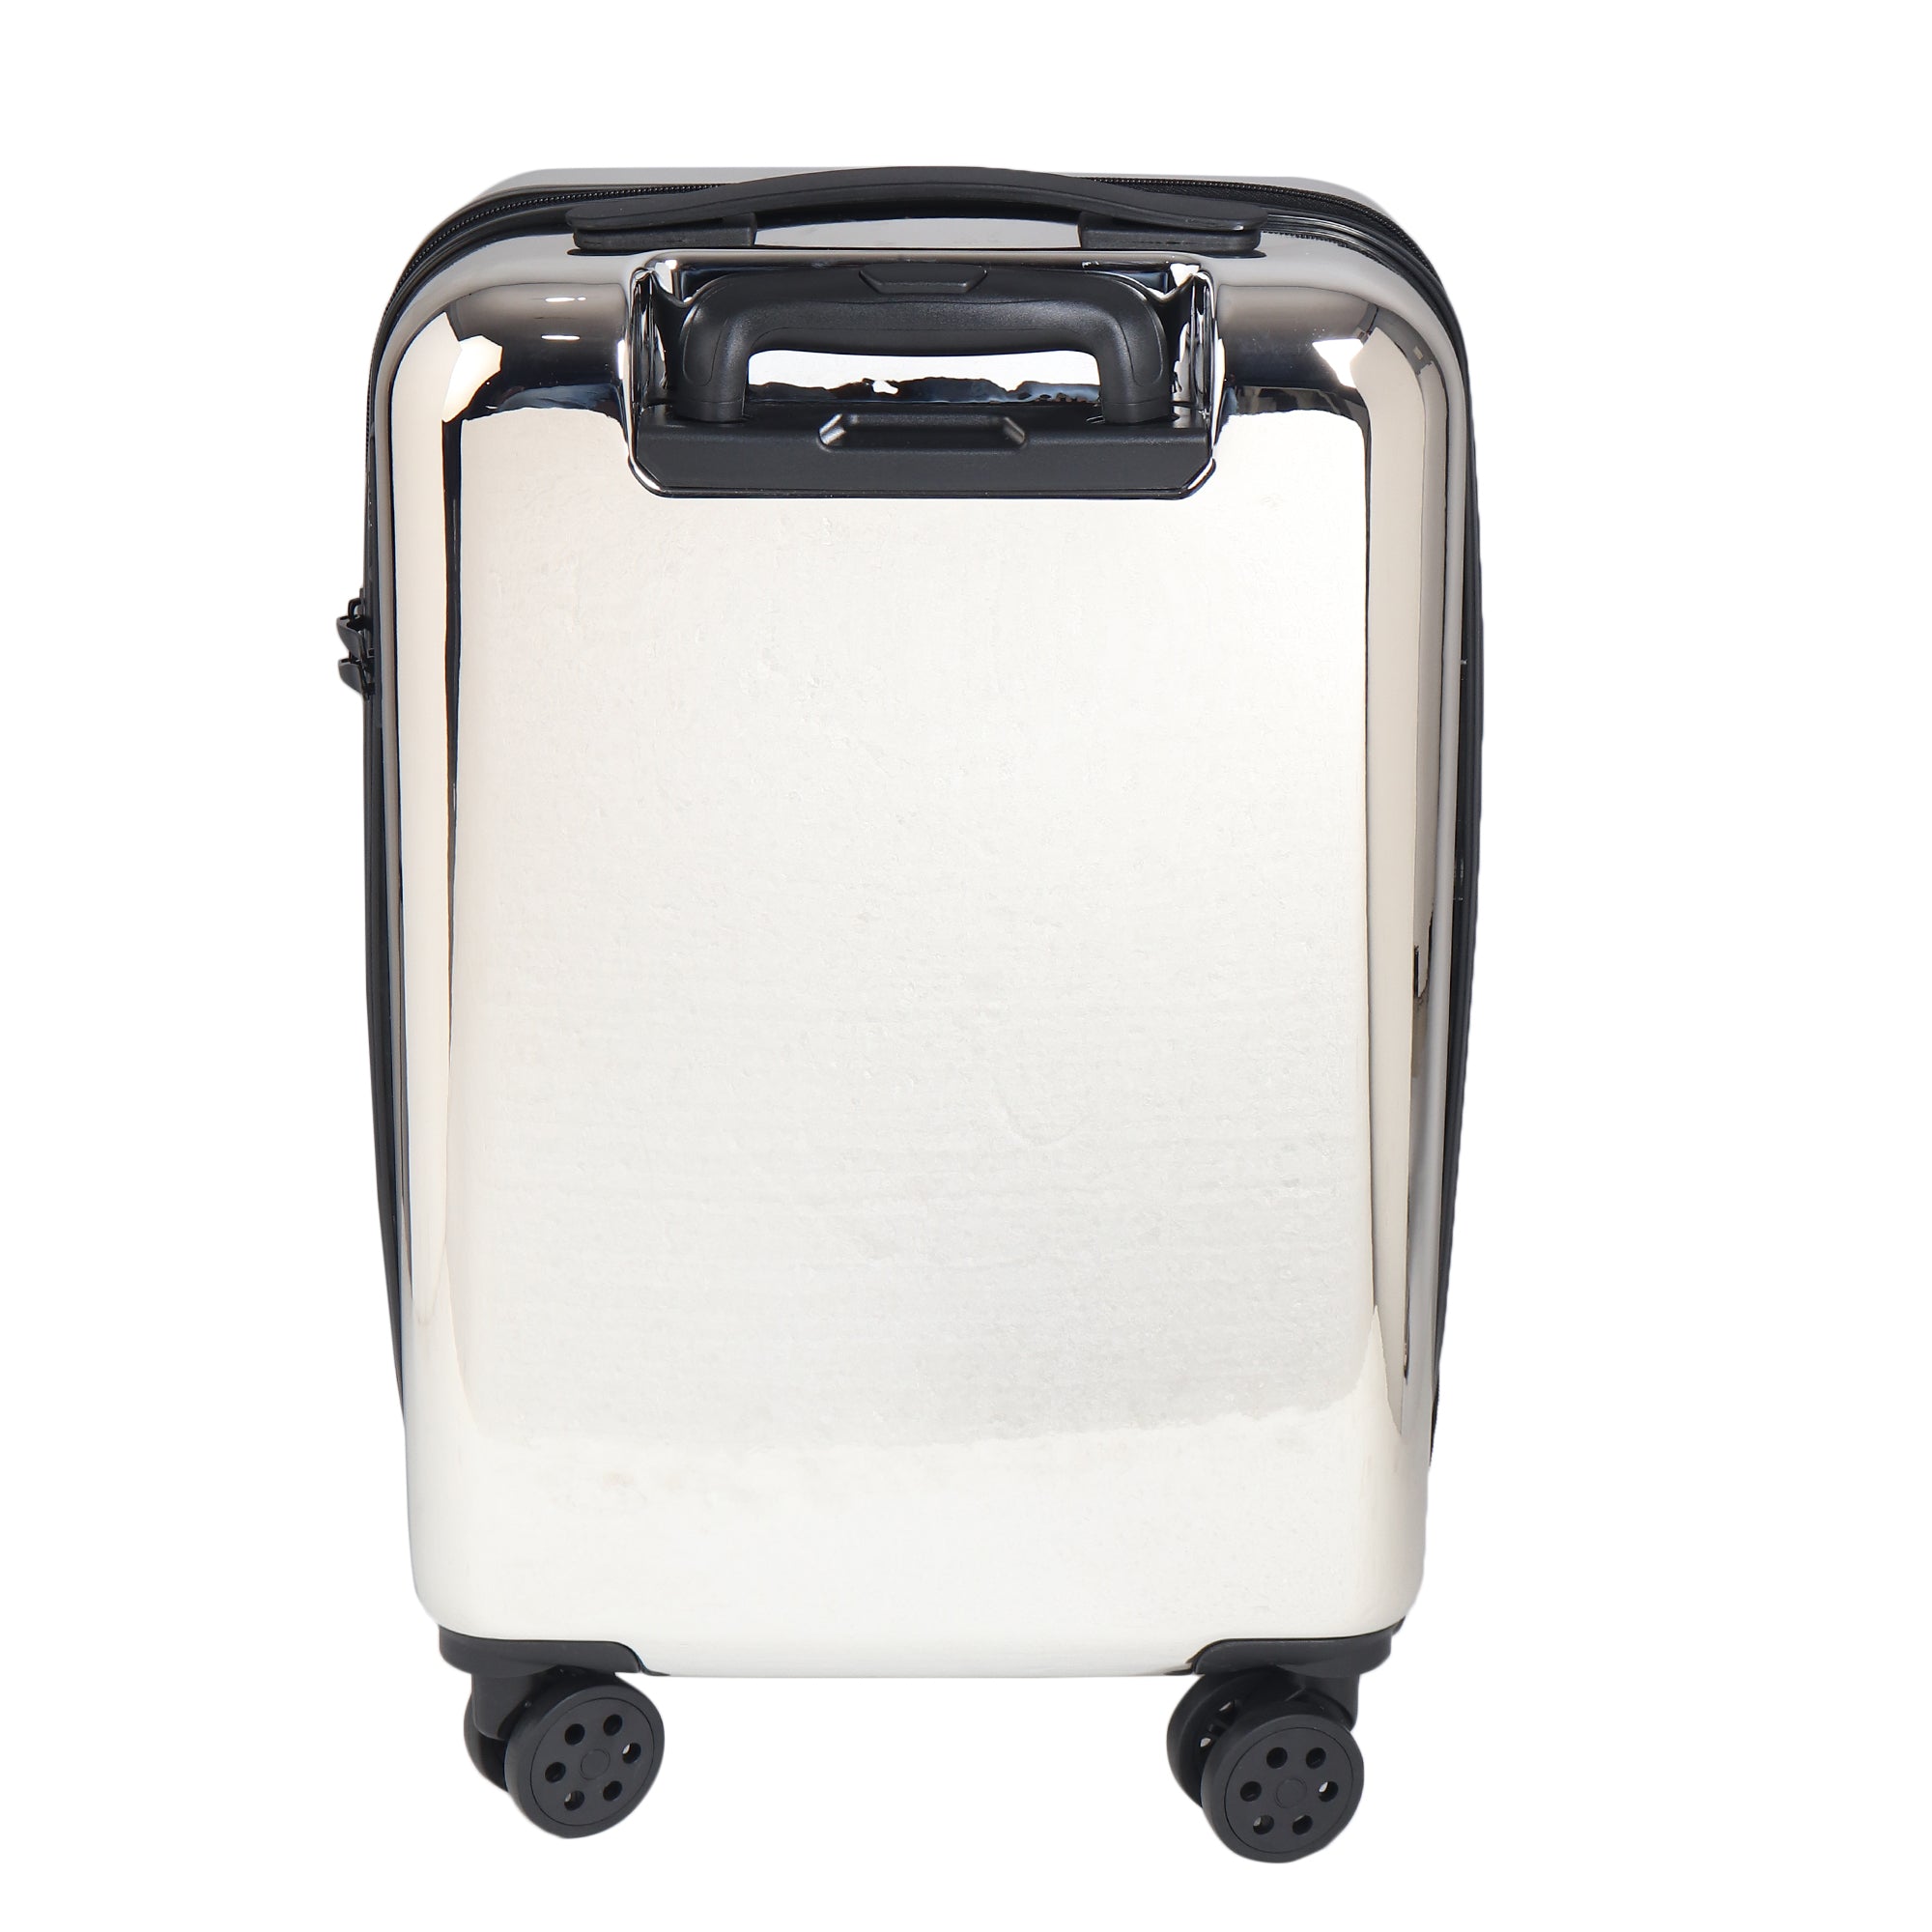 HL Vintage Suitcase/ 55 Cms ABS+ Polycarbonate Mirror Finish Hardsided Cabin Luggage ( Silver)